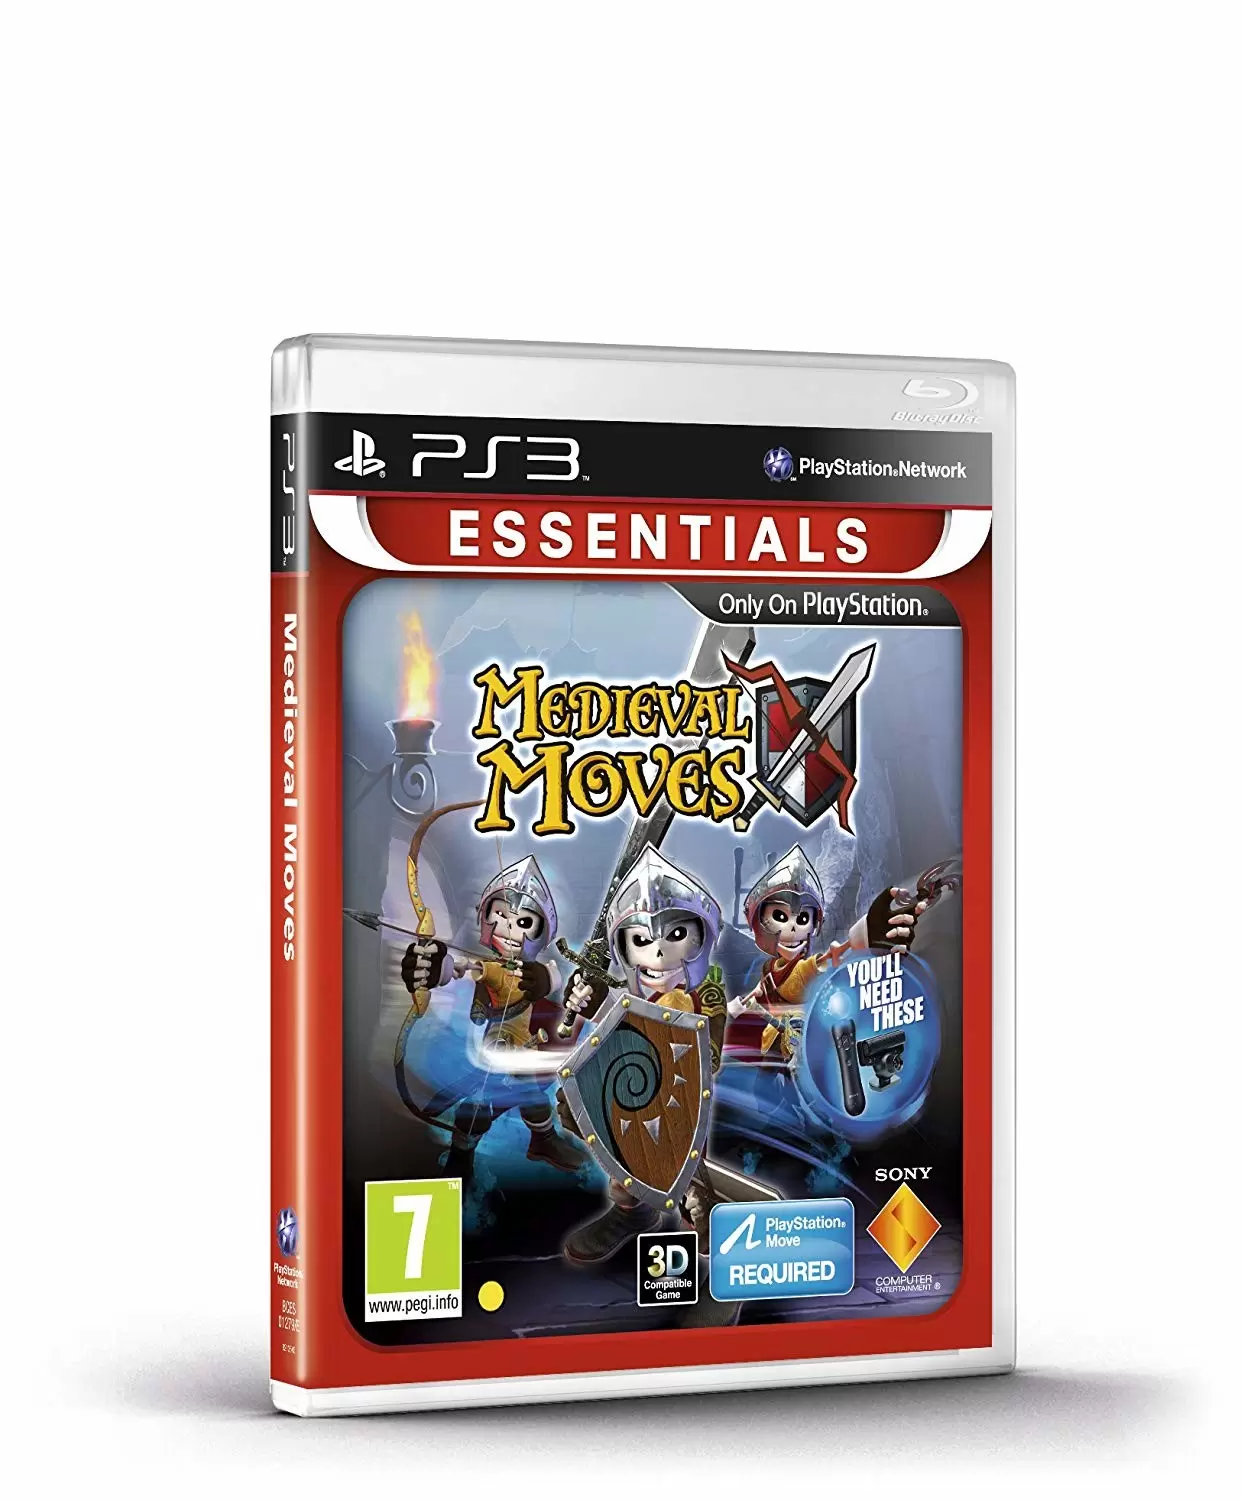 PS3 Games - Medieval Moves (Essentials)